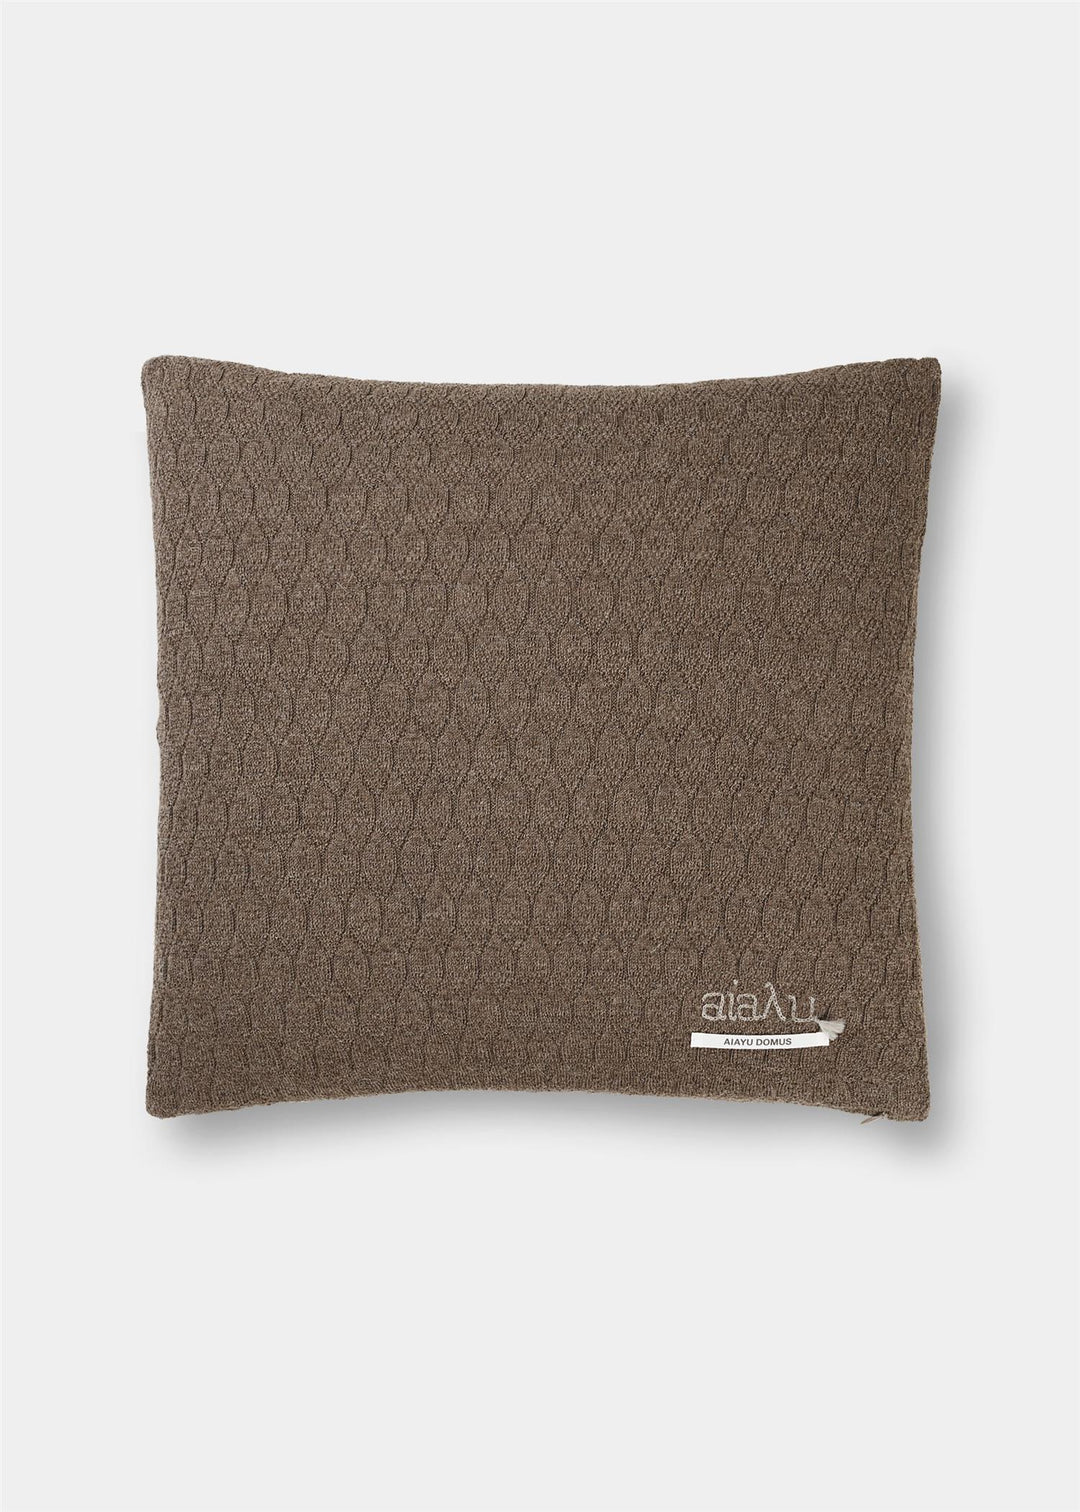 PILLOW RAUL CLASSIC 50*50 - BROWNIE - Dale